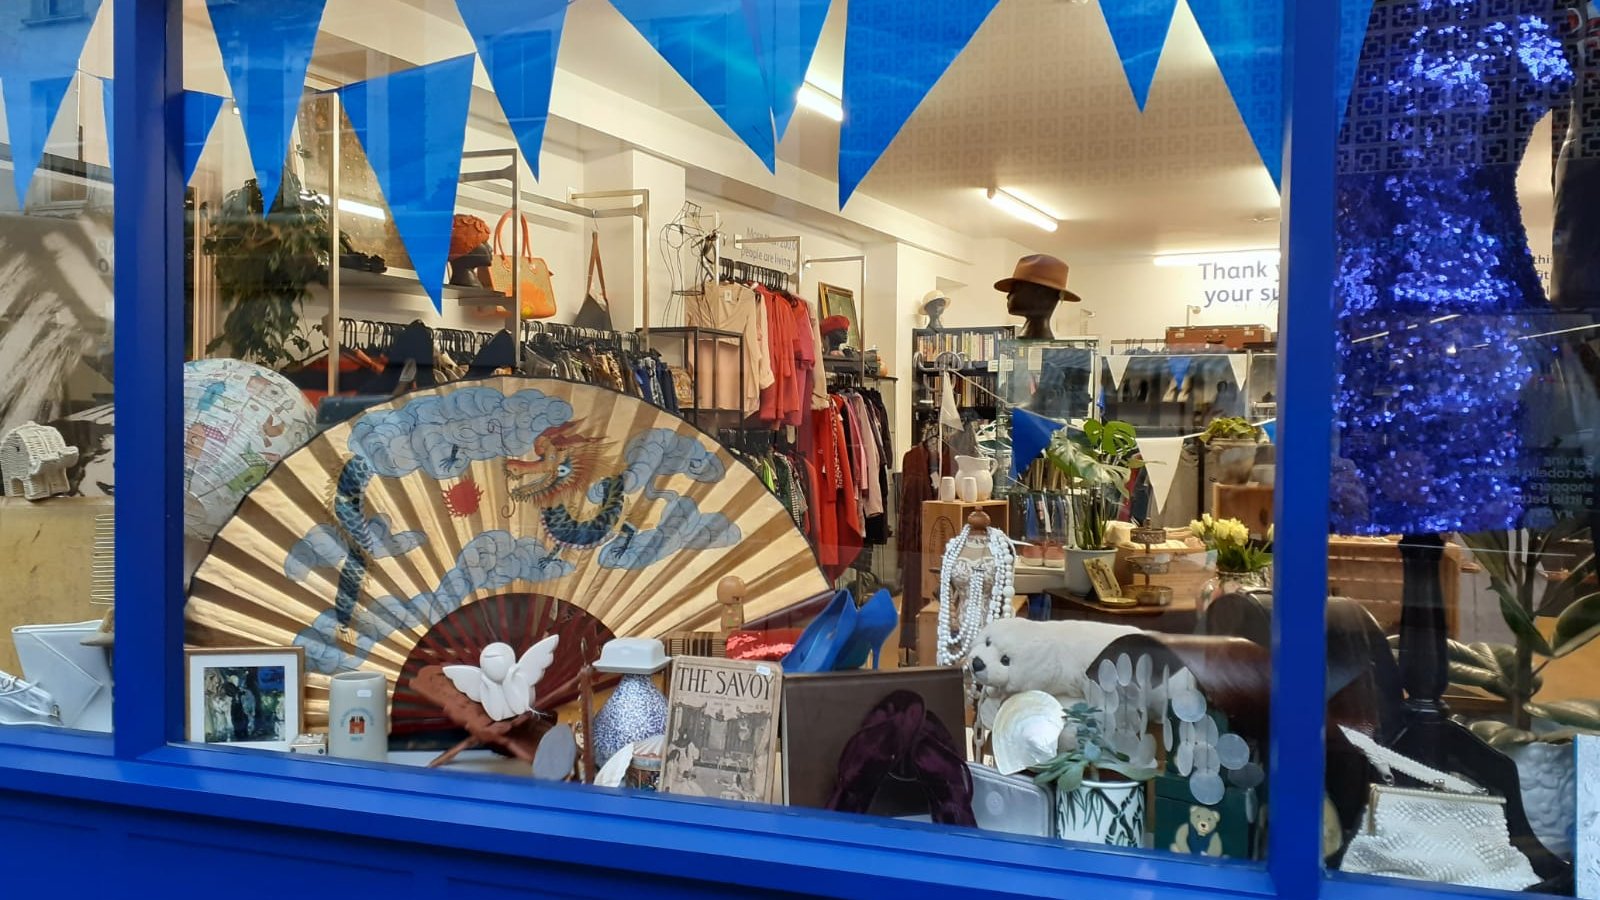 Vision Foundation charity shop window showing various items from the inside